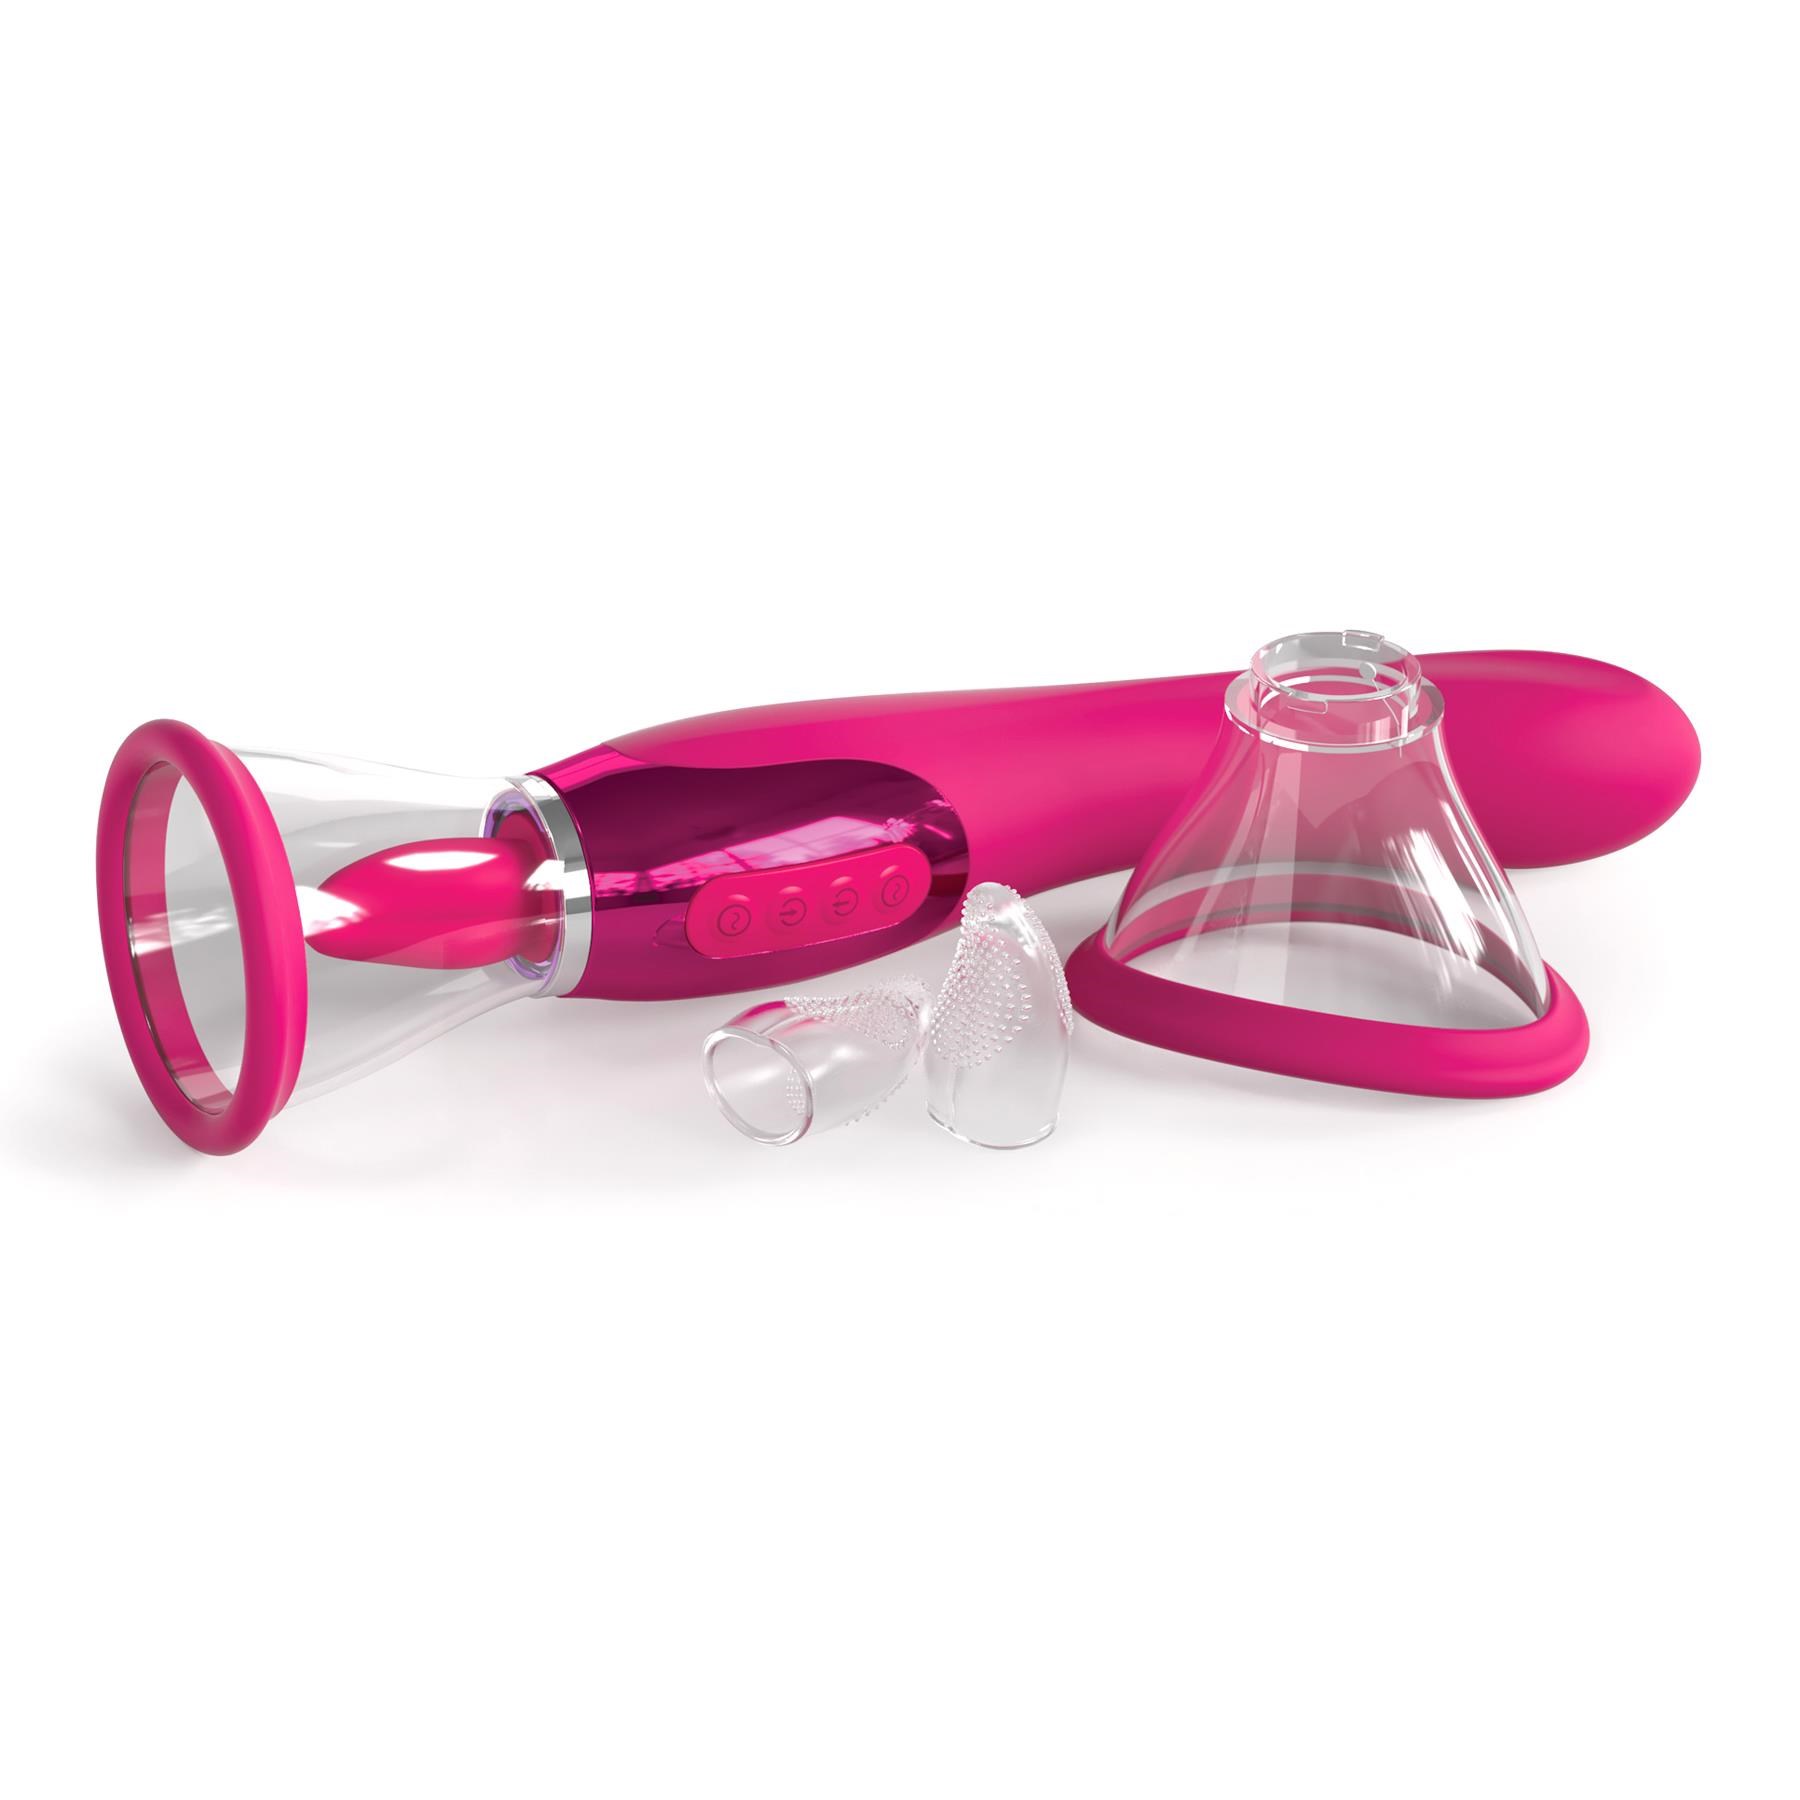 Jimmy Jane Apex Sucking, Licking and Vibrating Pussy Pump - Product Shot